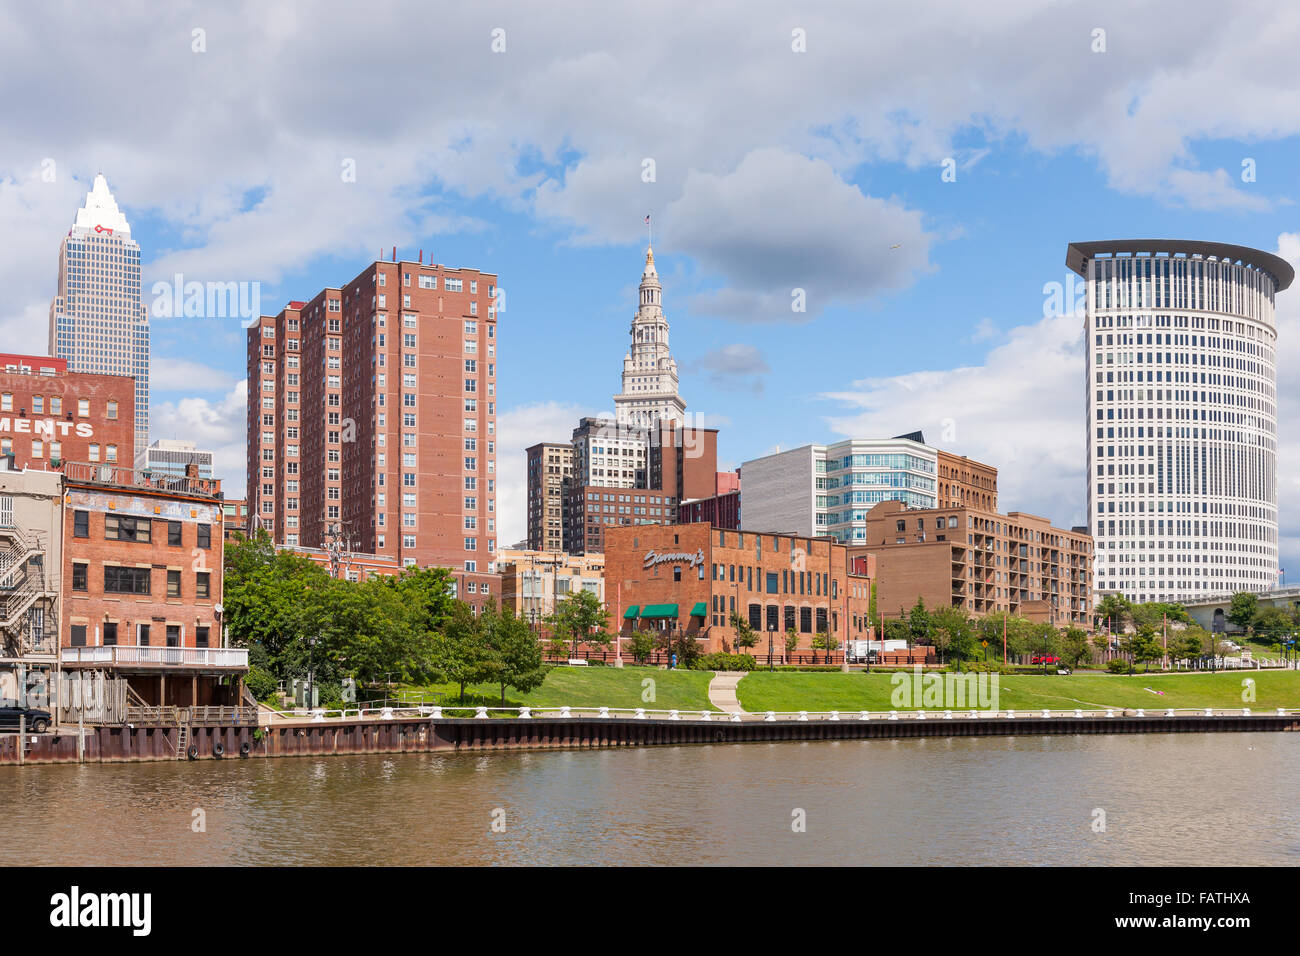 The skyline of Cleveland, Ohio as viewed over the Cuyahoga River from the Flats. Stock Photo